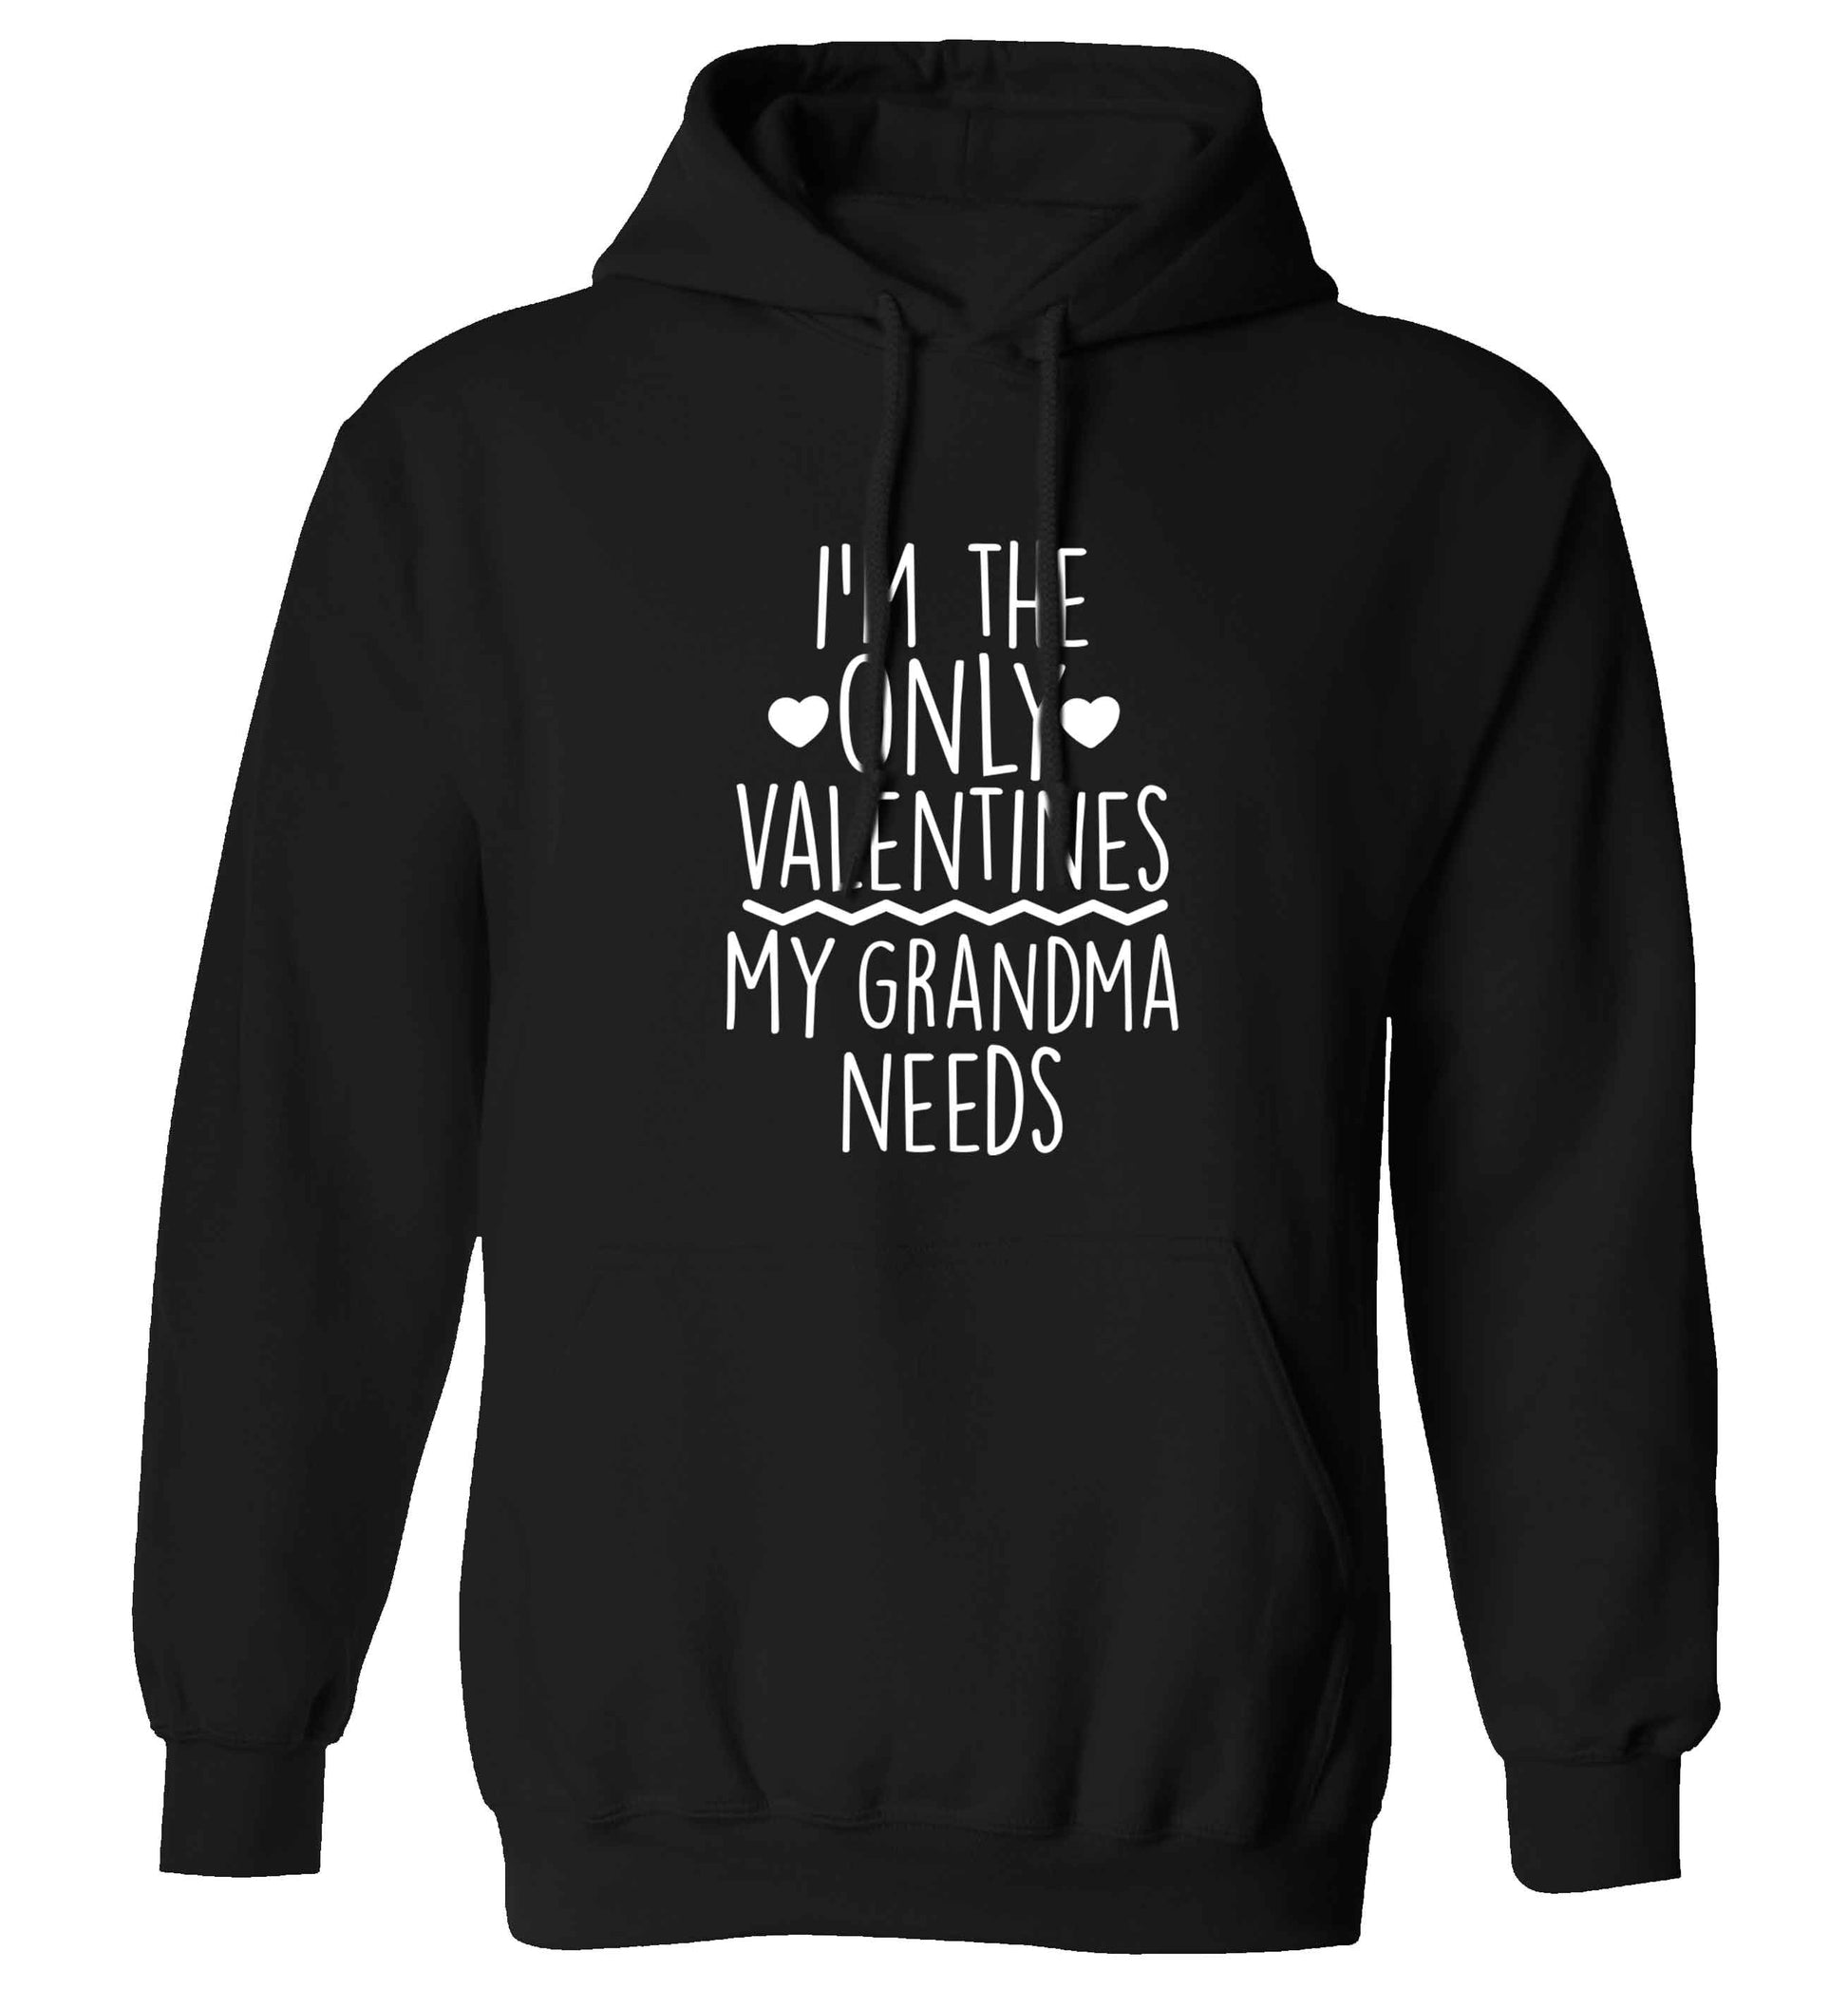 I'm the only valentines my grandma needs adults unisex black hoodie 2XL